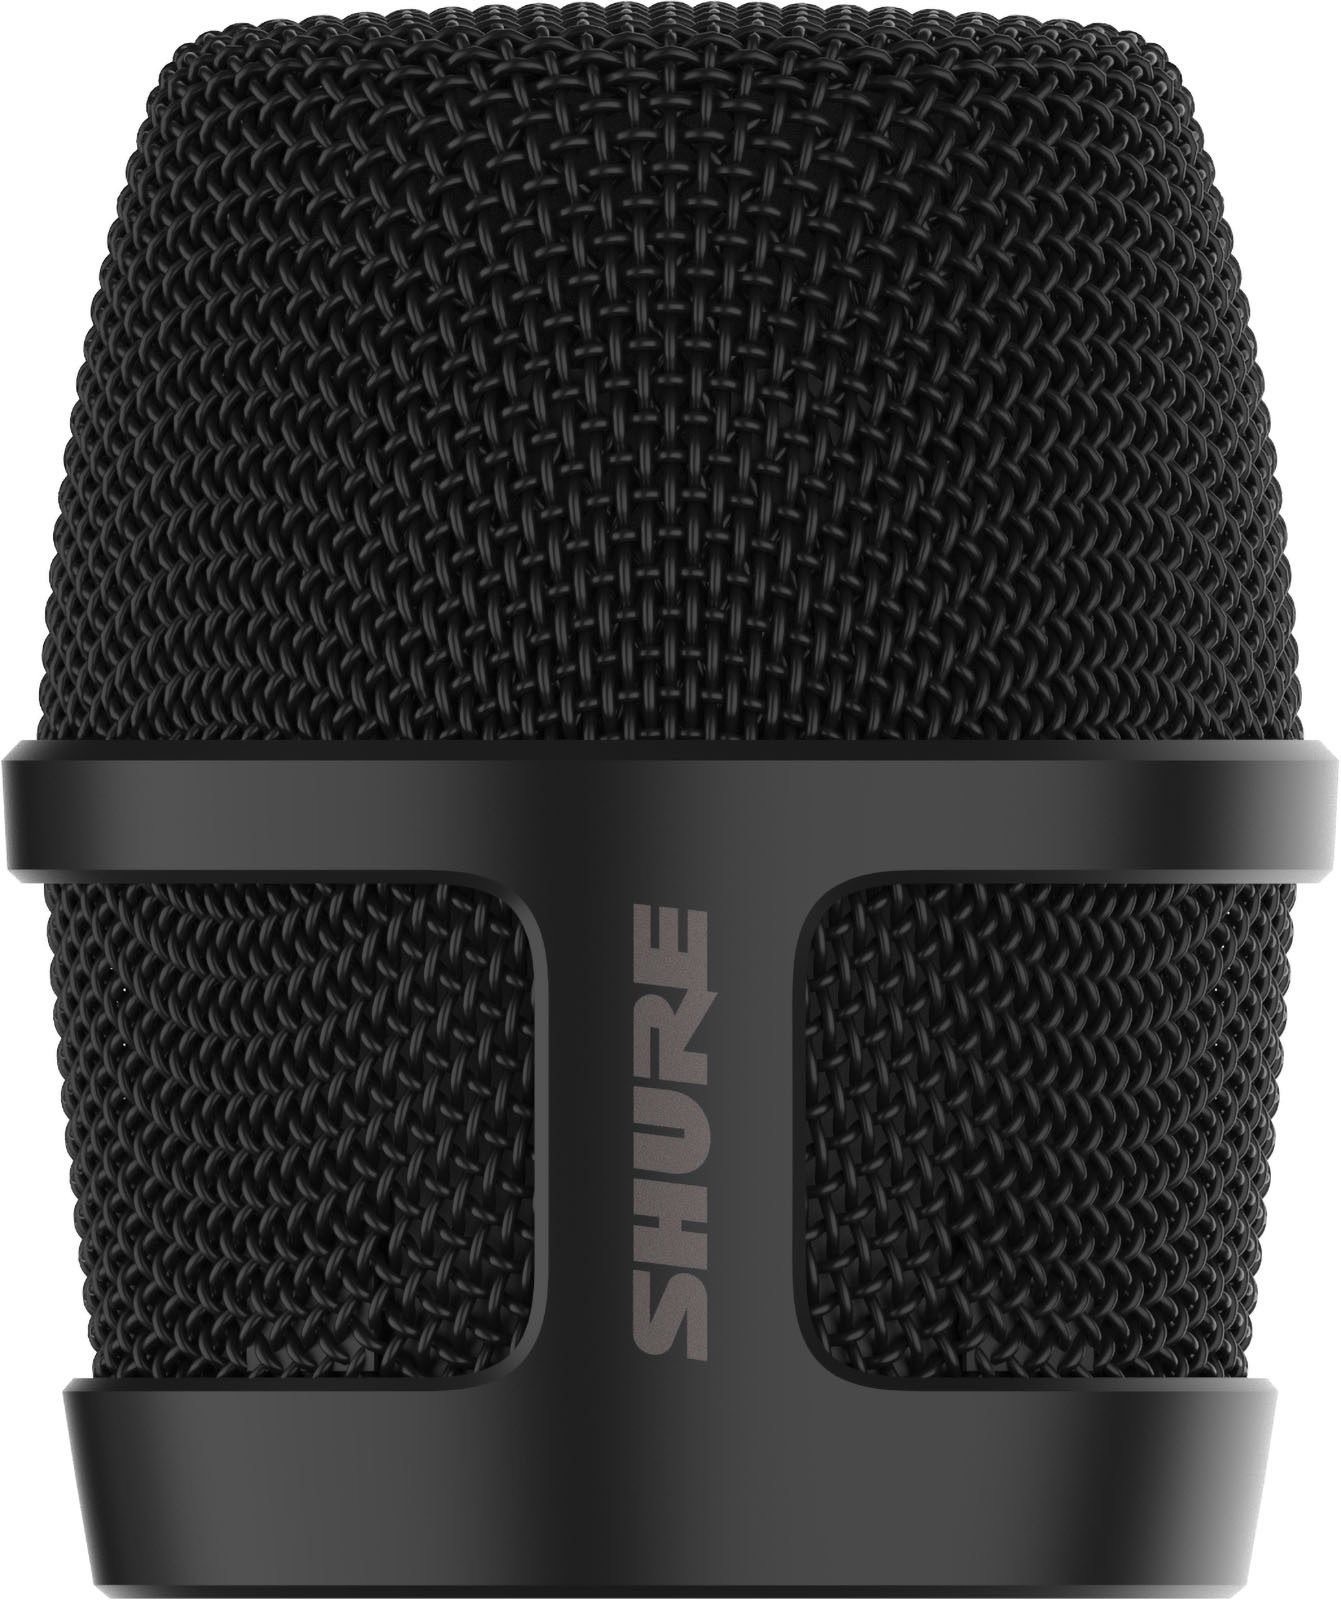 Shure Grille Noire Pour Nexadyne 8-c - Microfoonrooster - Main picture